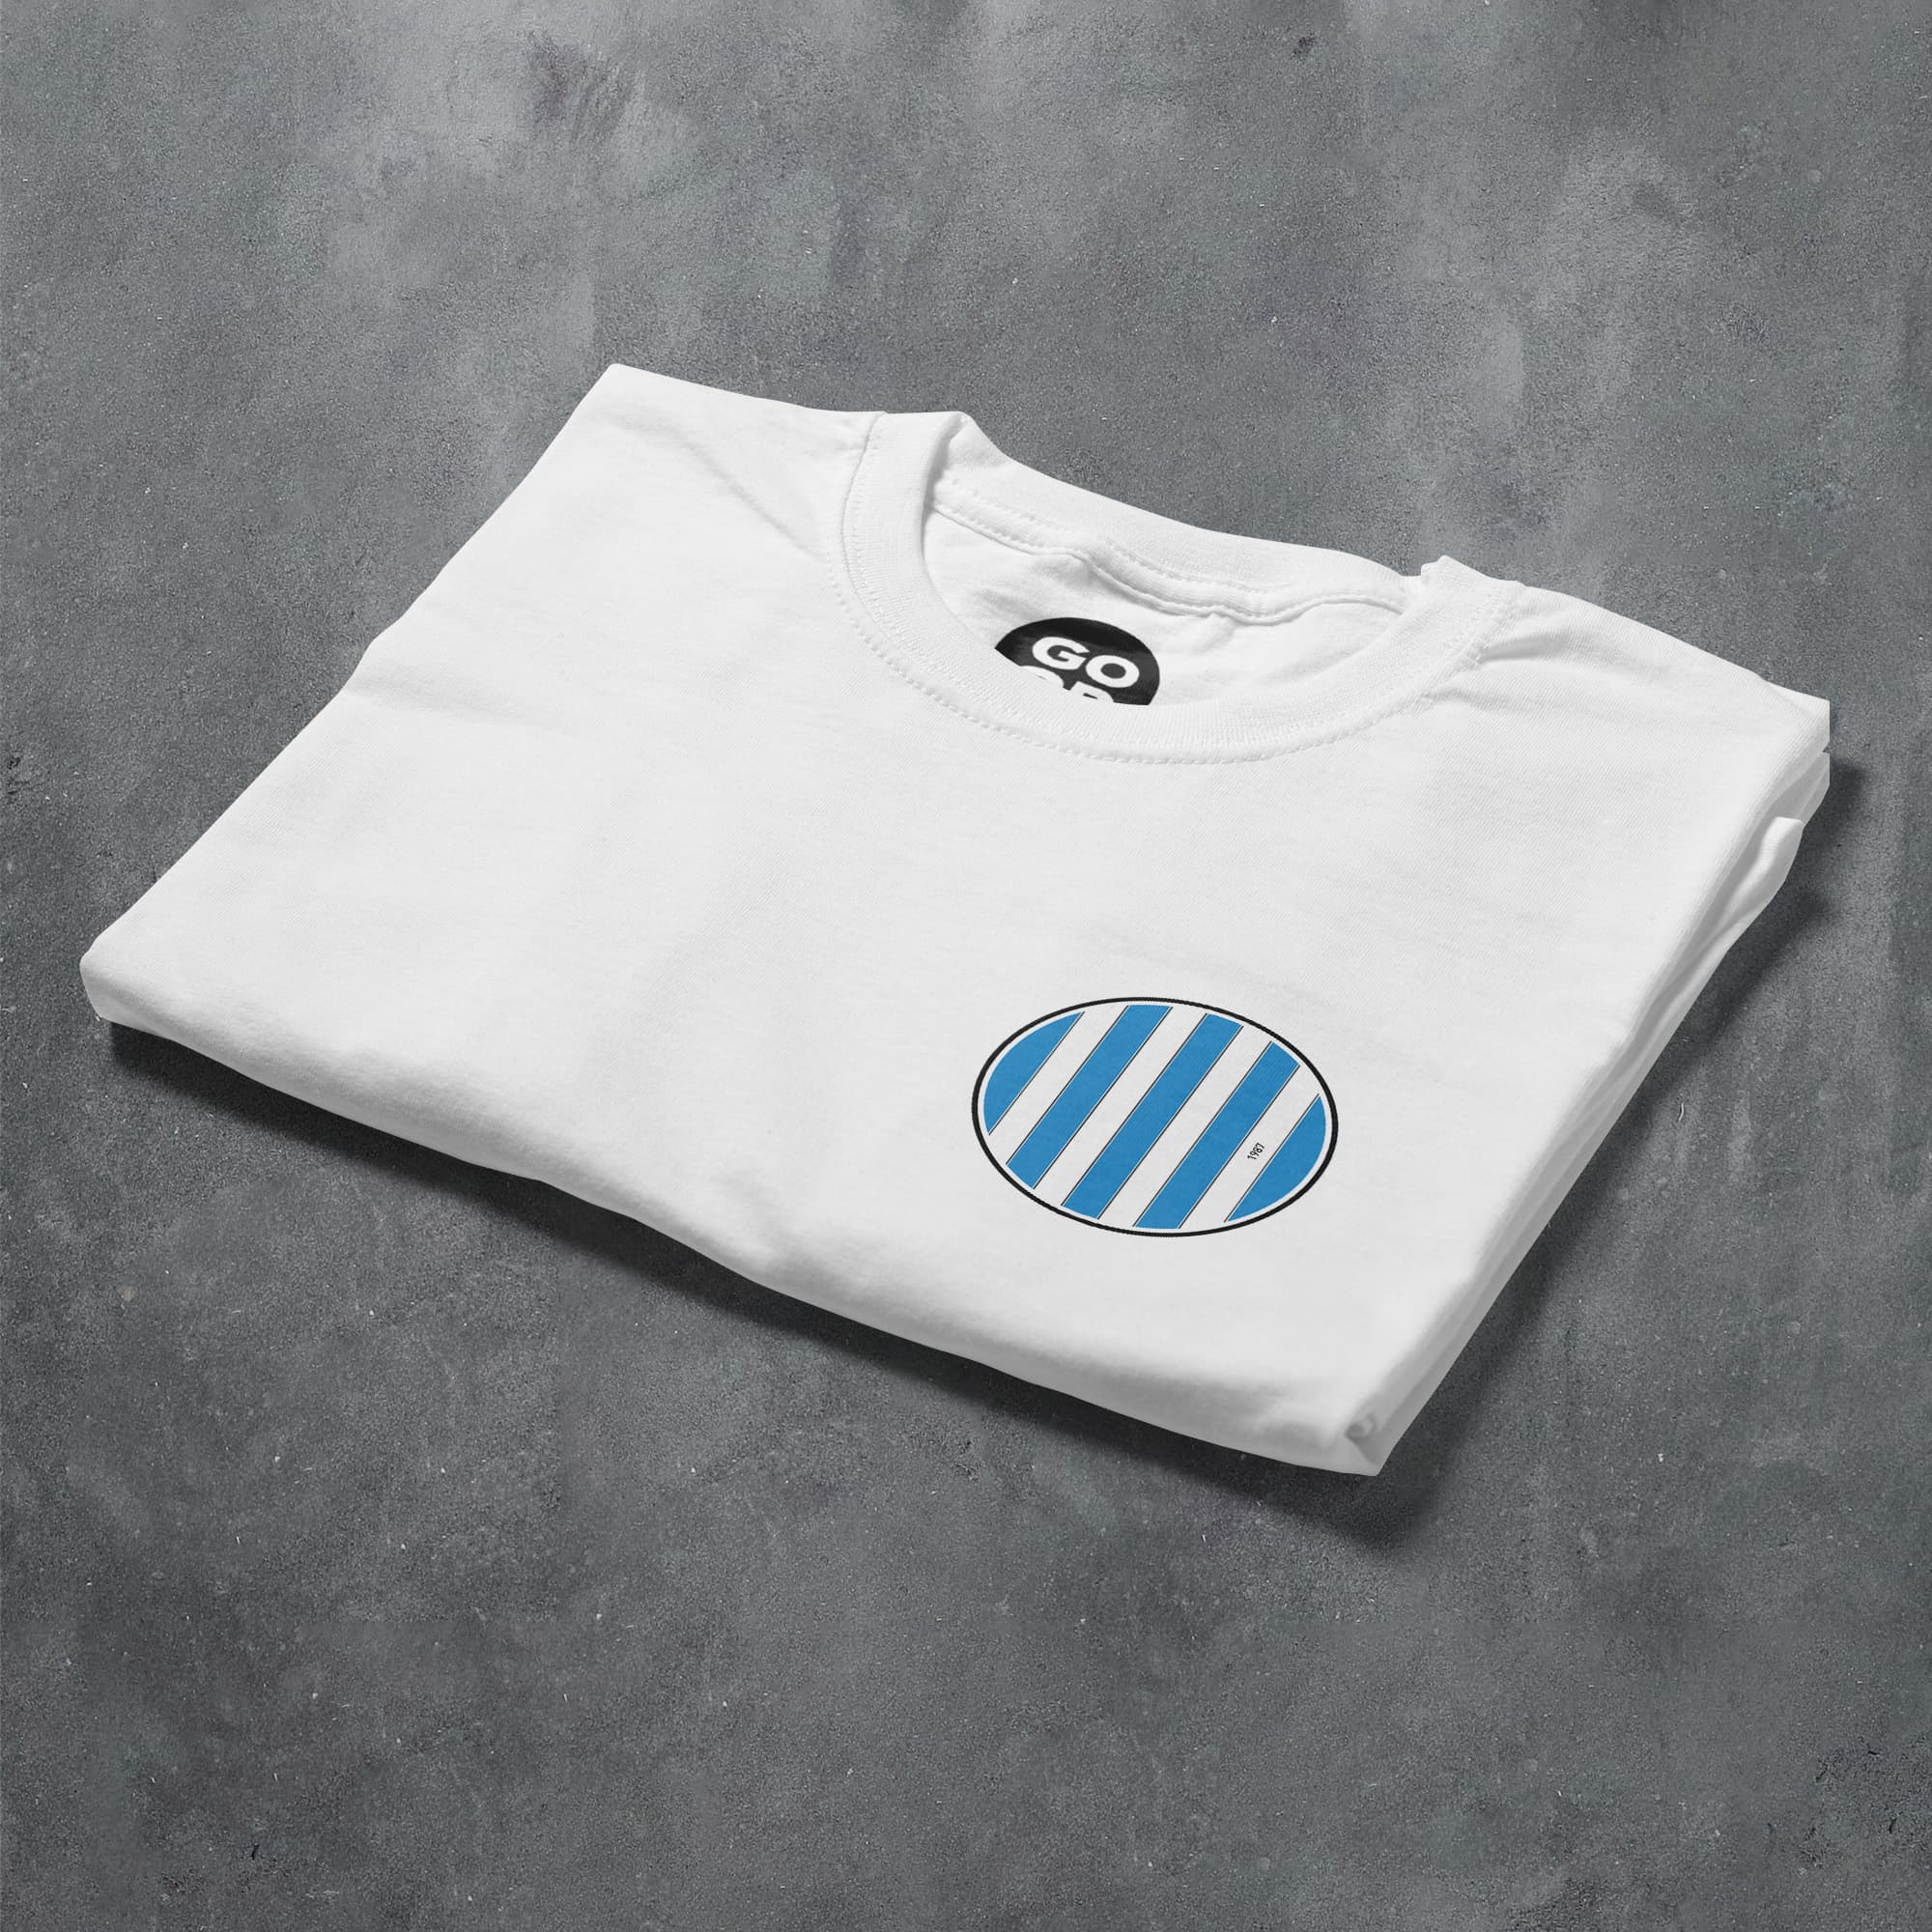 a white t - shirt with blue and white stripes on it